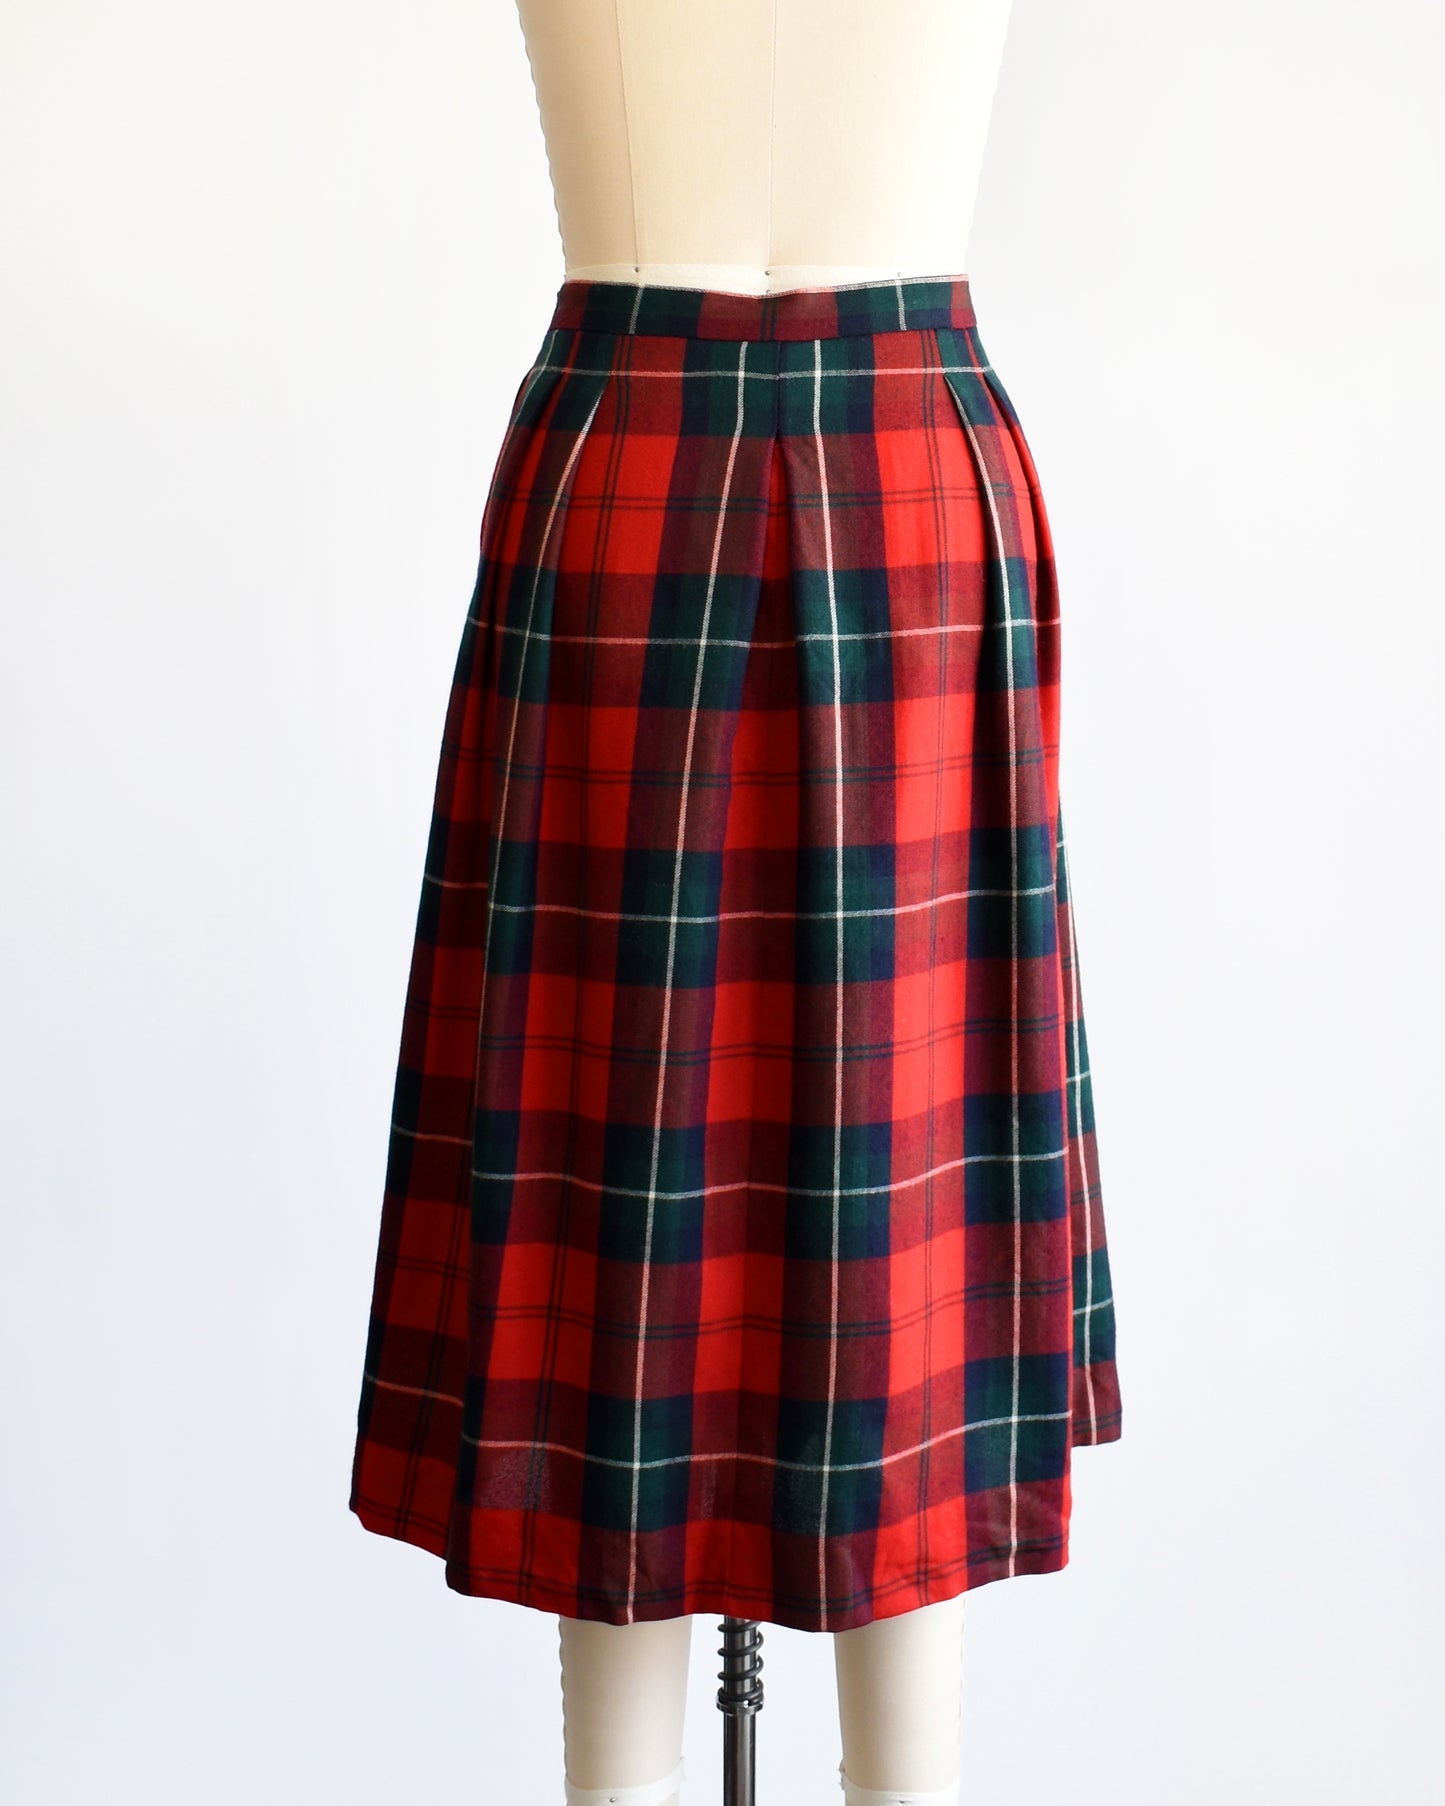 Back view of a vintage 80s red and green plaid pleated skirt on a dress form